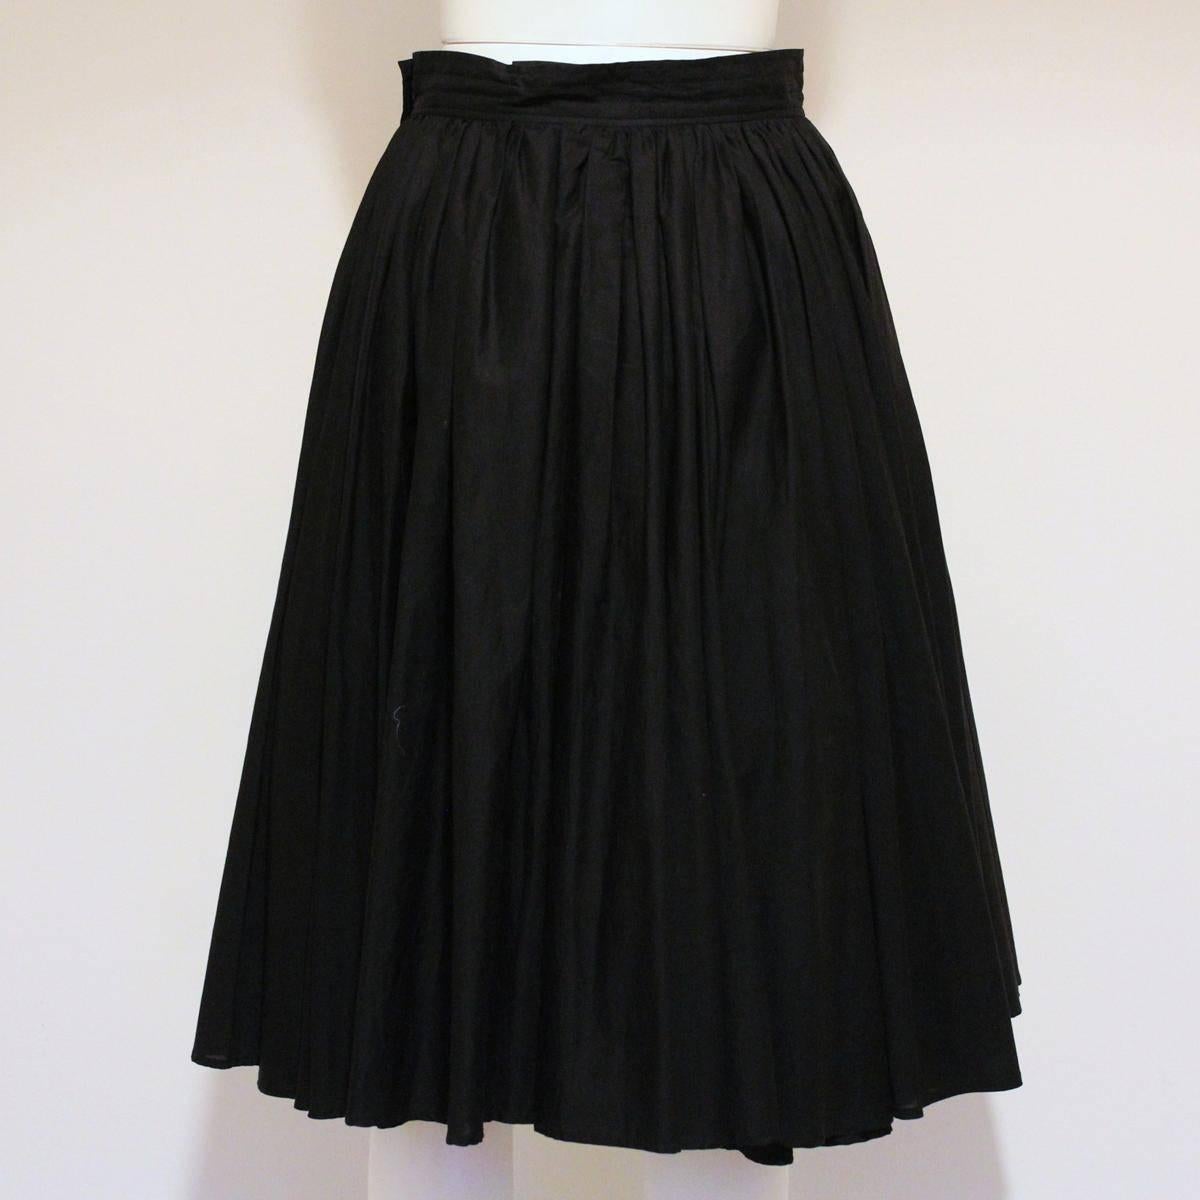 Beautiful Dries Van Noten skirt
100% cotton
Black colour
Automatic button and clip closure
Large structure, double round
Total length cm 70 (27.6 inches)
Worldwide express shipping included in the price !